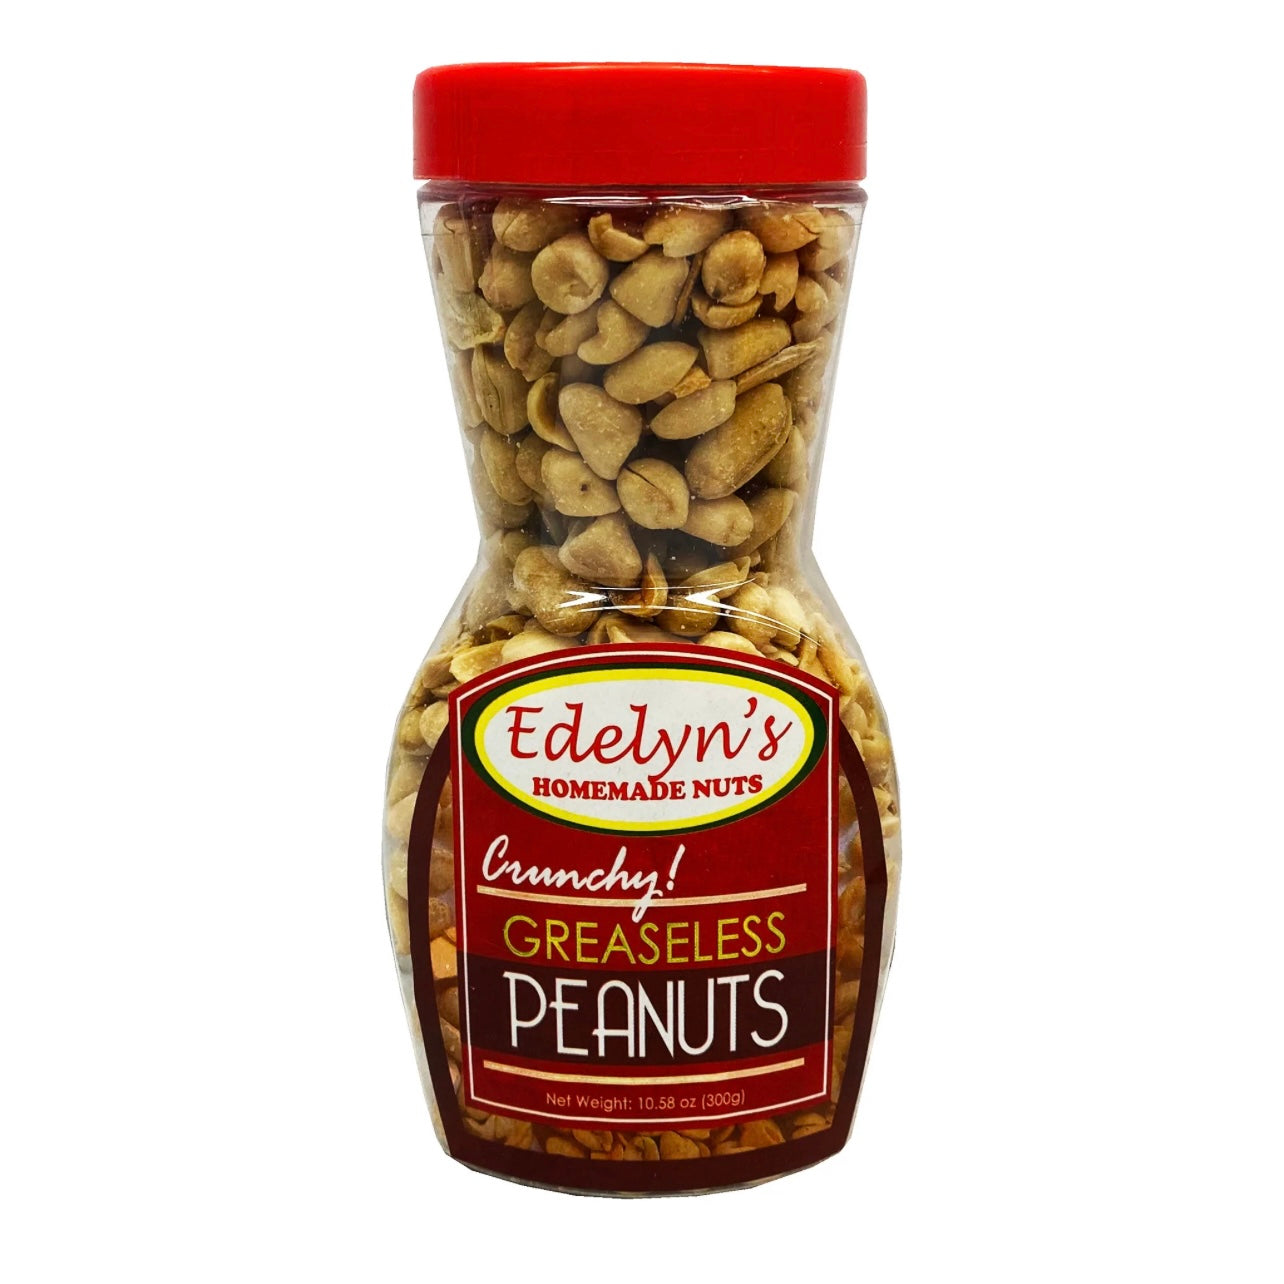 Edelyn's Homemade Nuts Crunchy Greaseless Peanuts